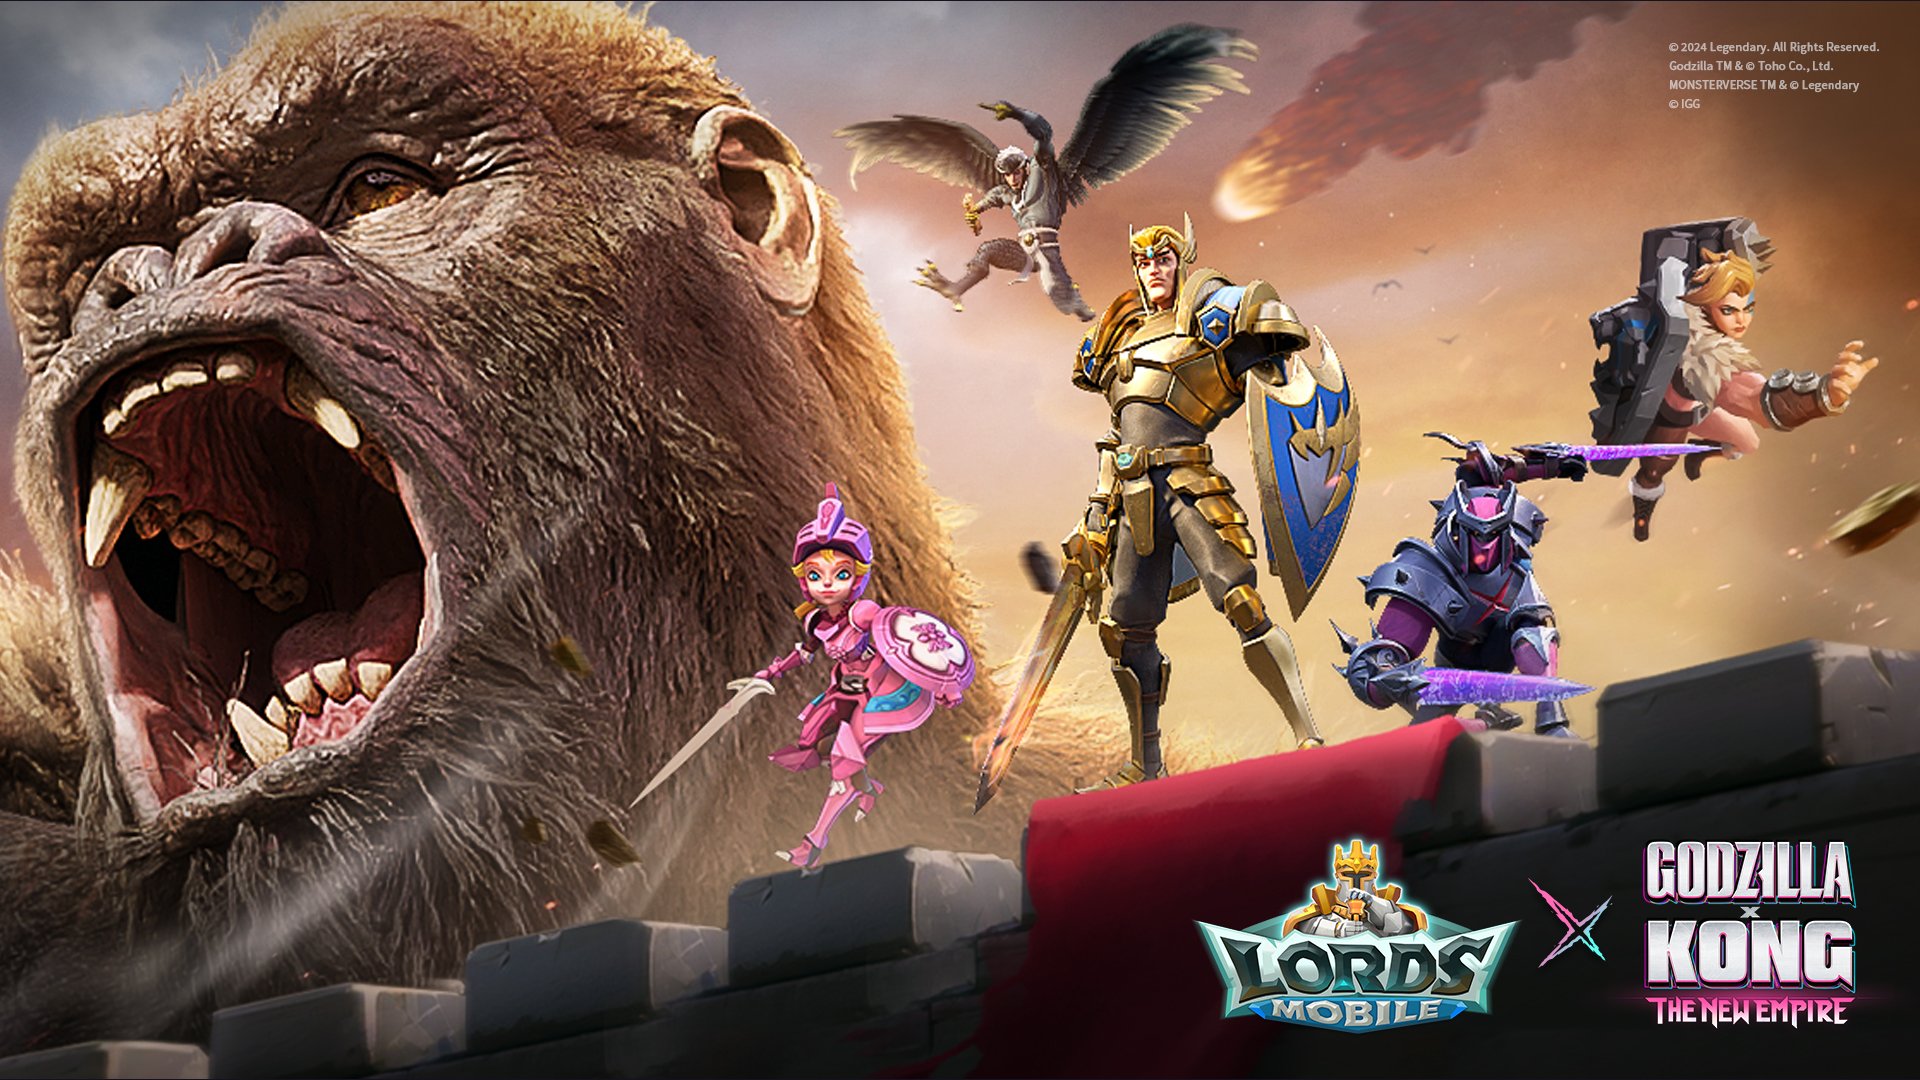 Apple Products and In-Game Goodies up for Grabs in the Lords Mobile Godzilla Kong War Event